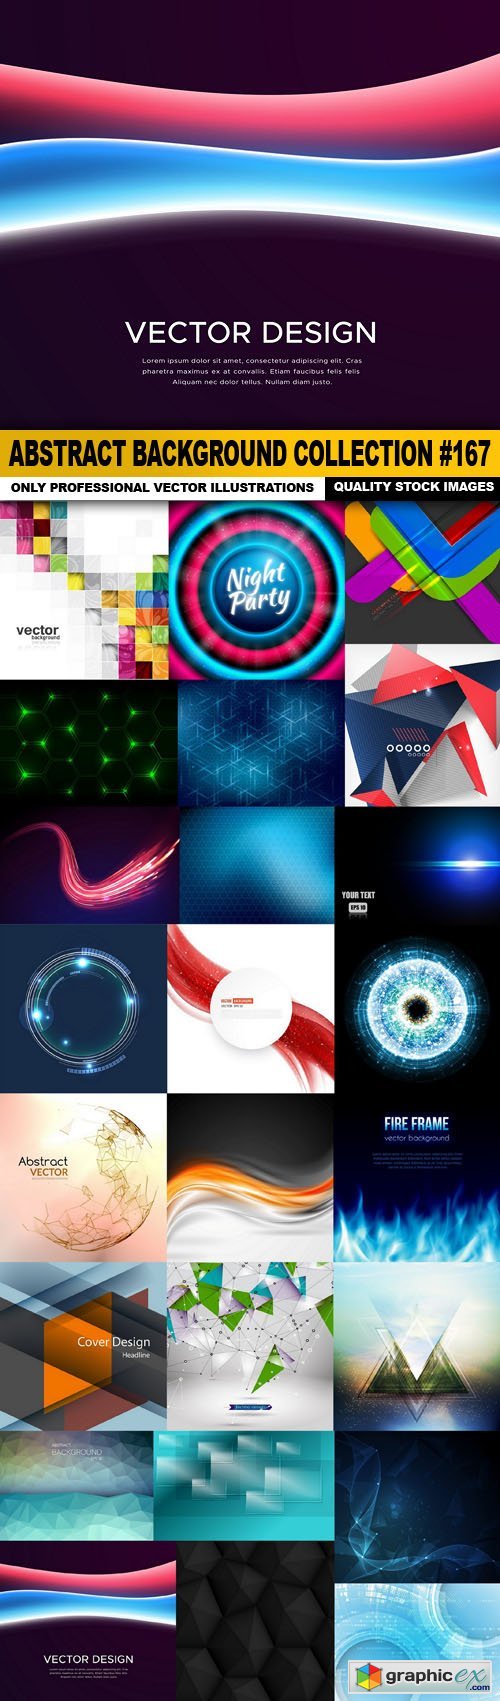 Abstract Background Collection #167 - 25 Vector